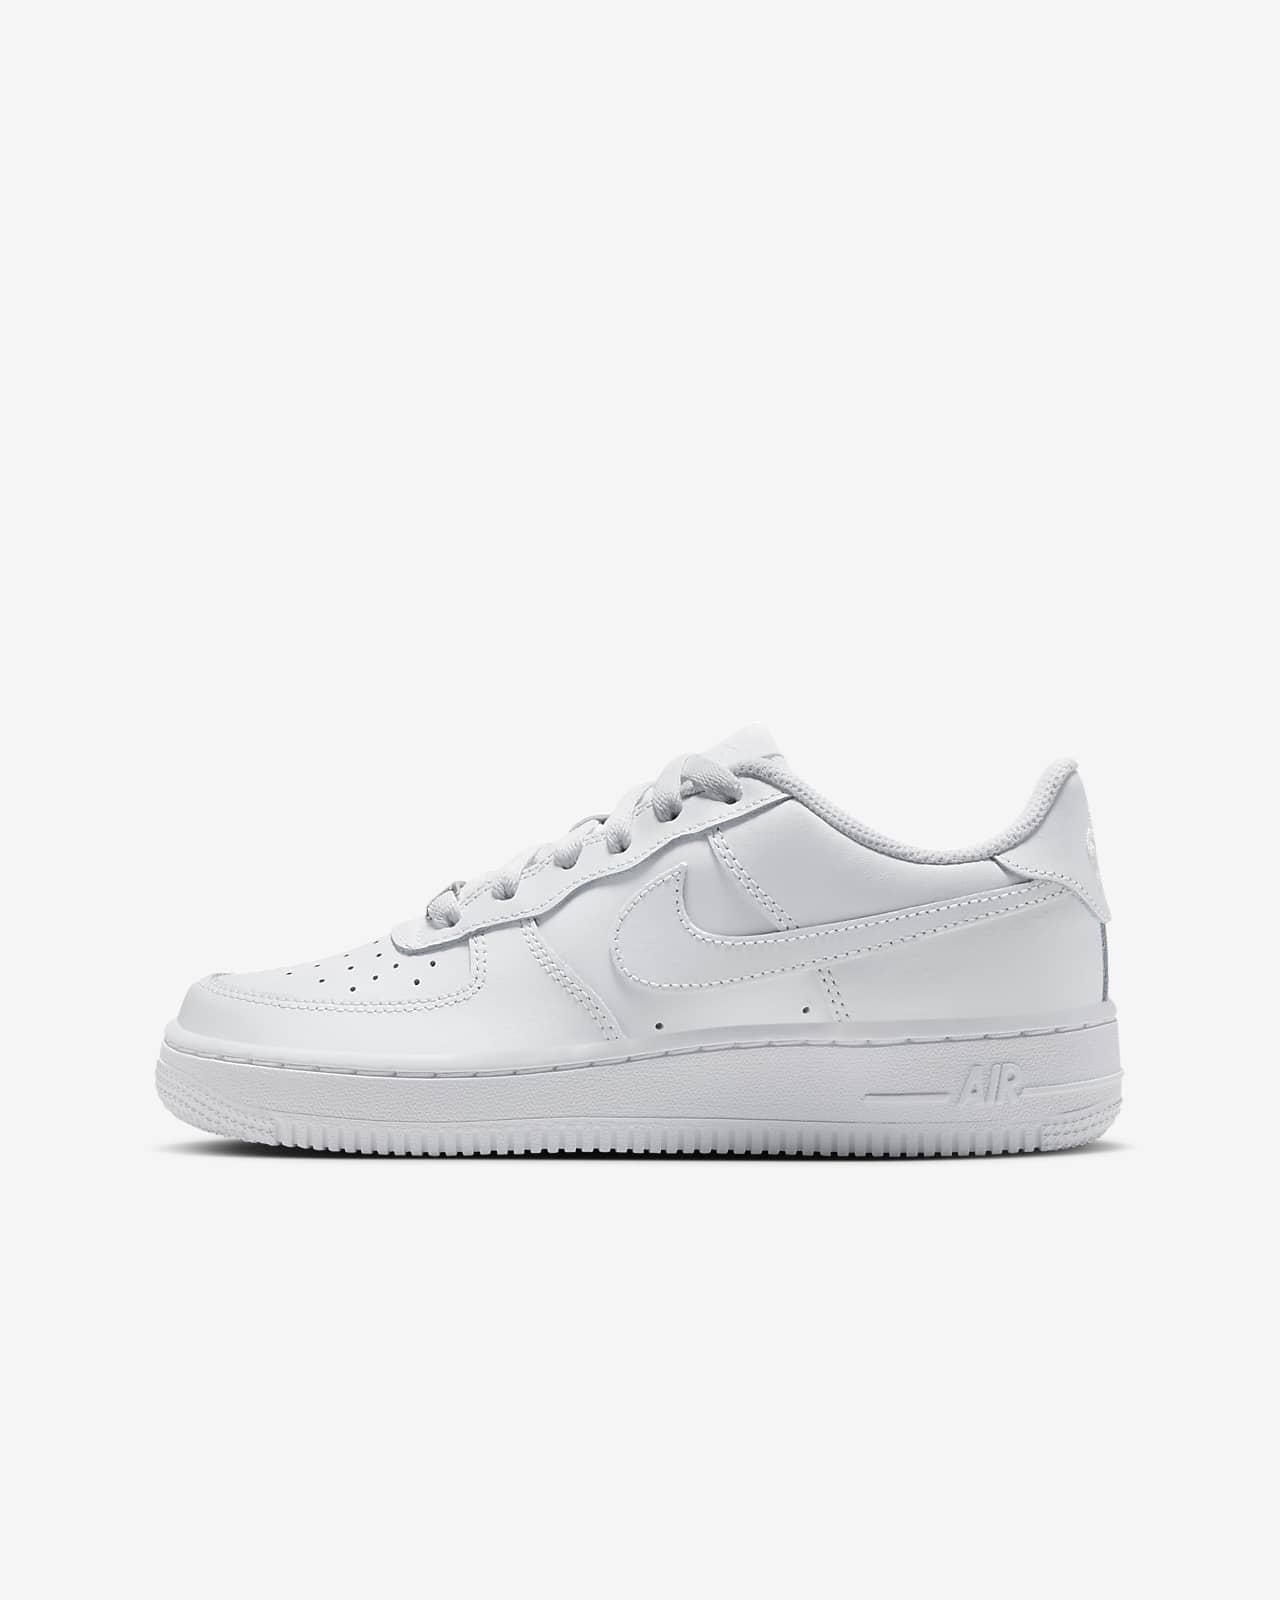 Stand up instead toxicity Temerity Nike Air Force 1 LE Big Kids' Shoes. Nike.com